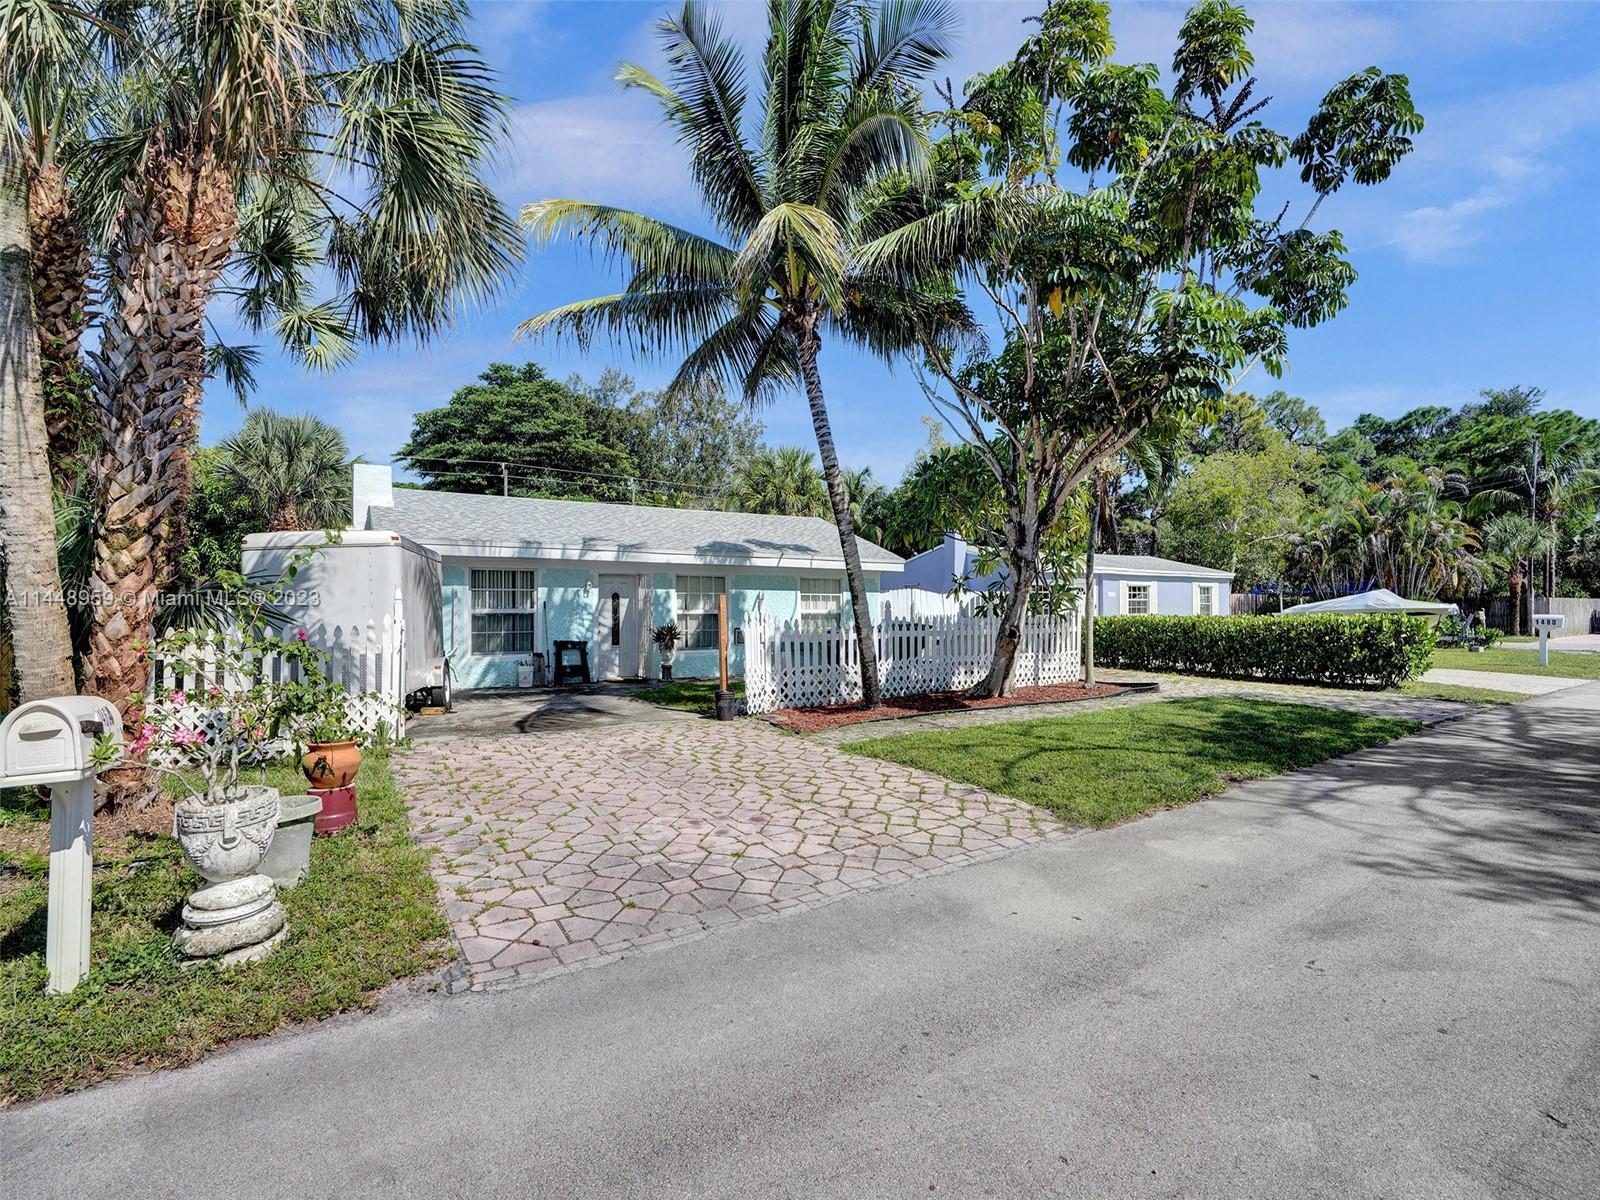 Perfectly Positioned Home Near Ft. Lauderdale Airport and Downtown Fort Lauderdale. Ideally situated